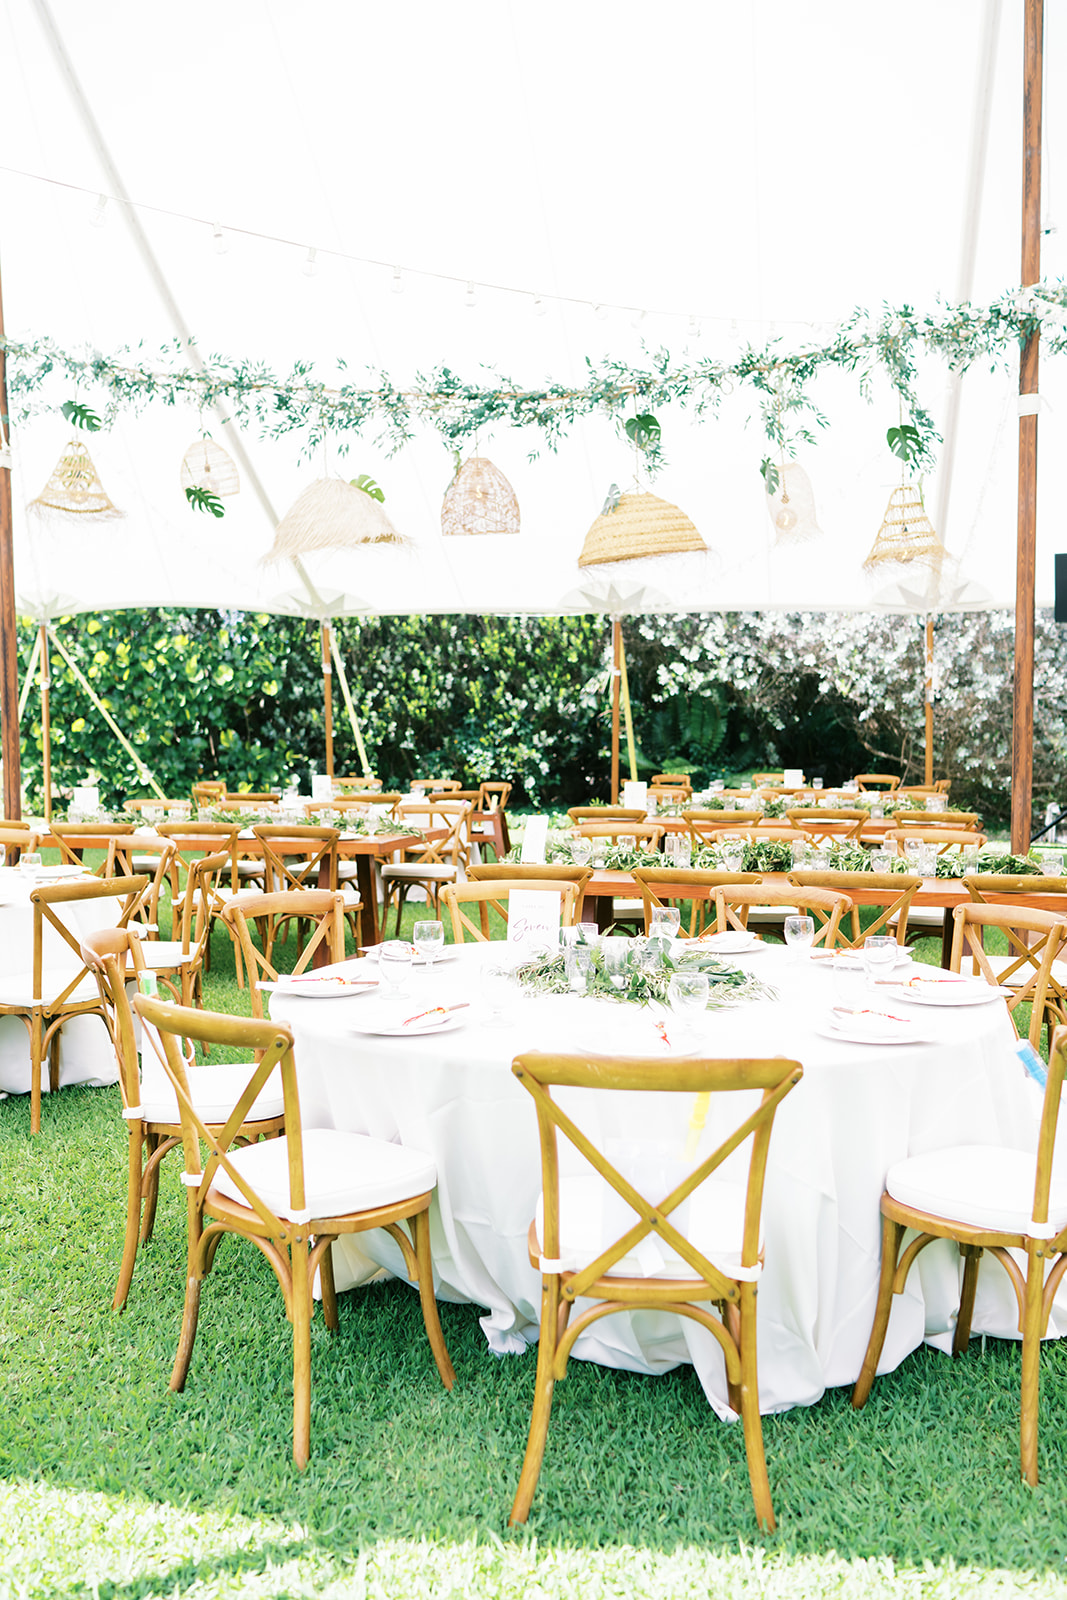 Outdoor dining setup for an event with wooden chairs and tables covered with white linens Wedding at Na Aina Kai